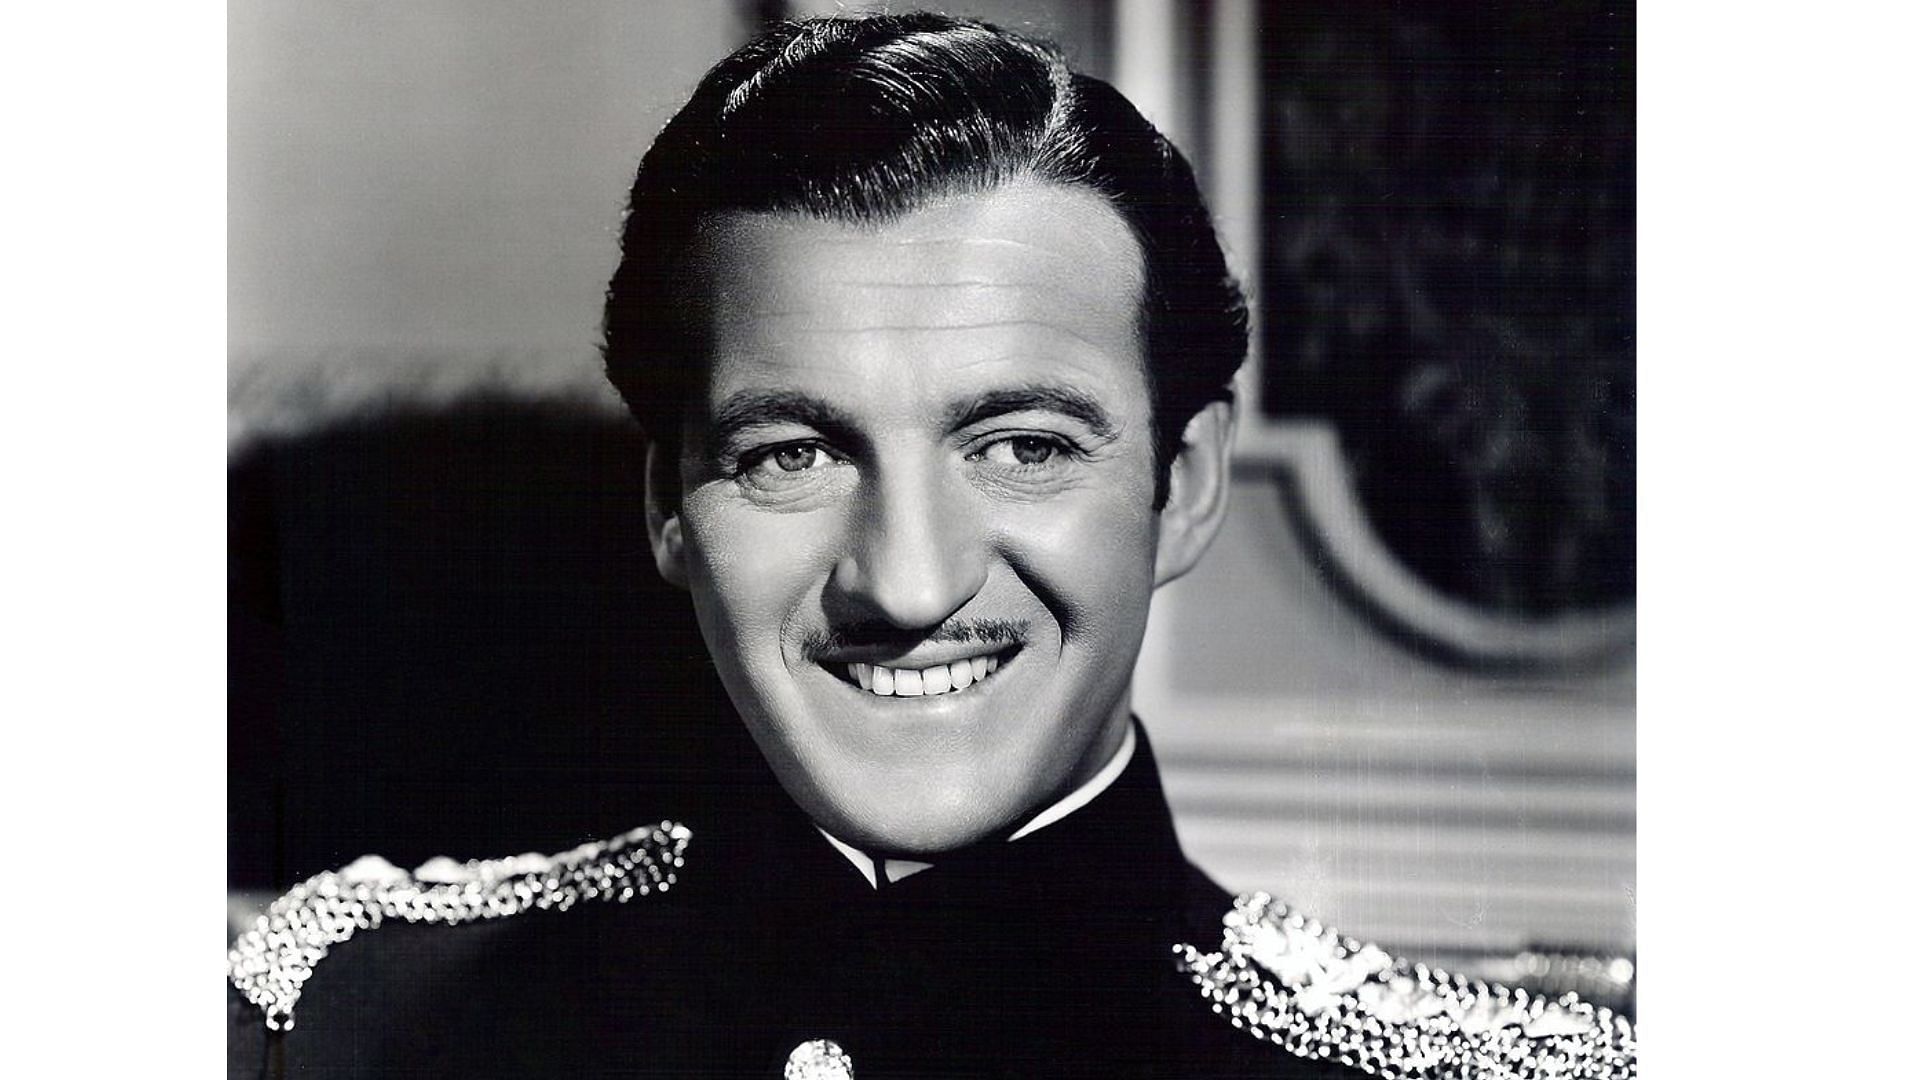 Niven was a one-movie Bond (Image credit credit Wikipedia and Samuel Goldwyn productions)